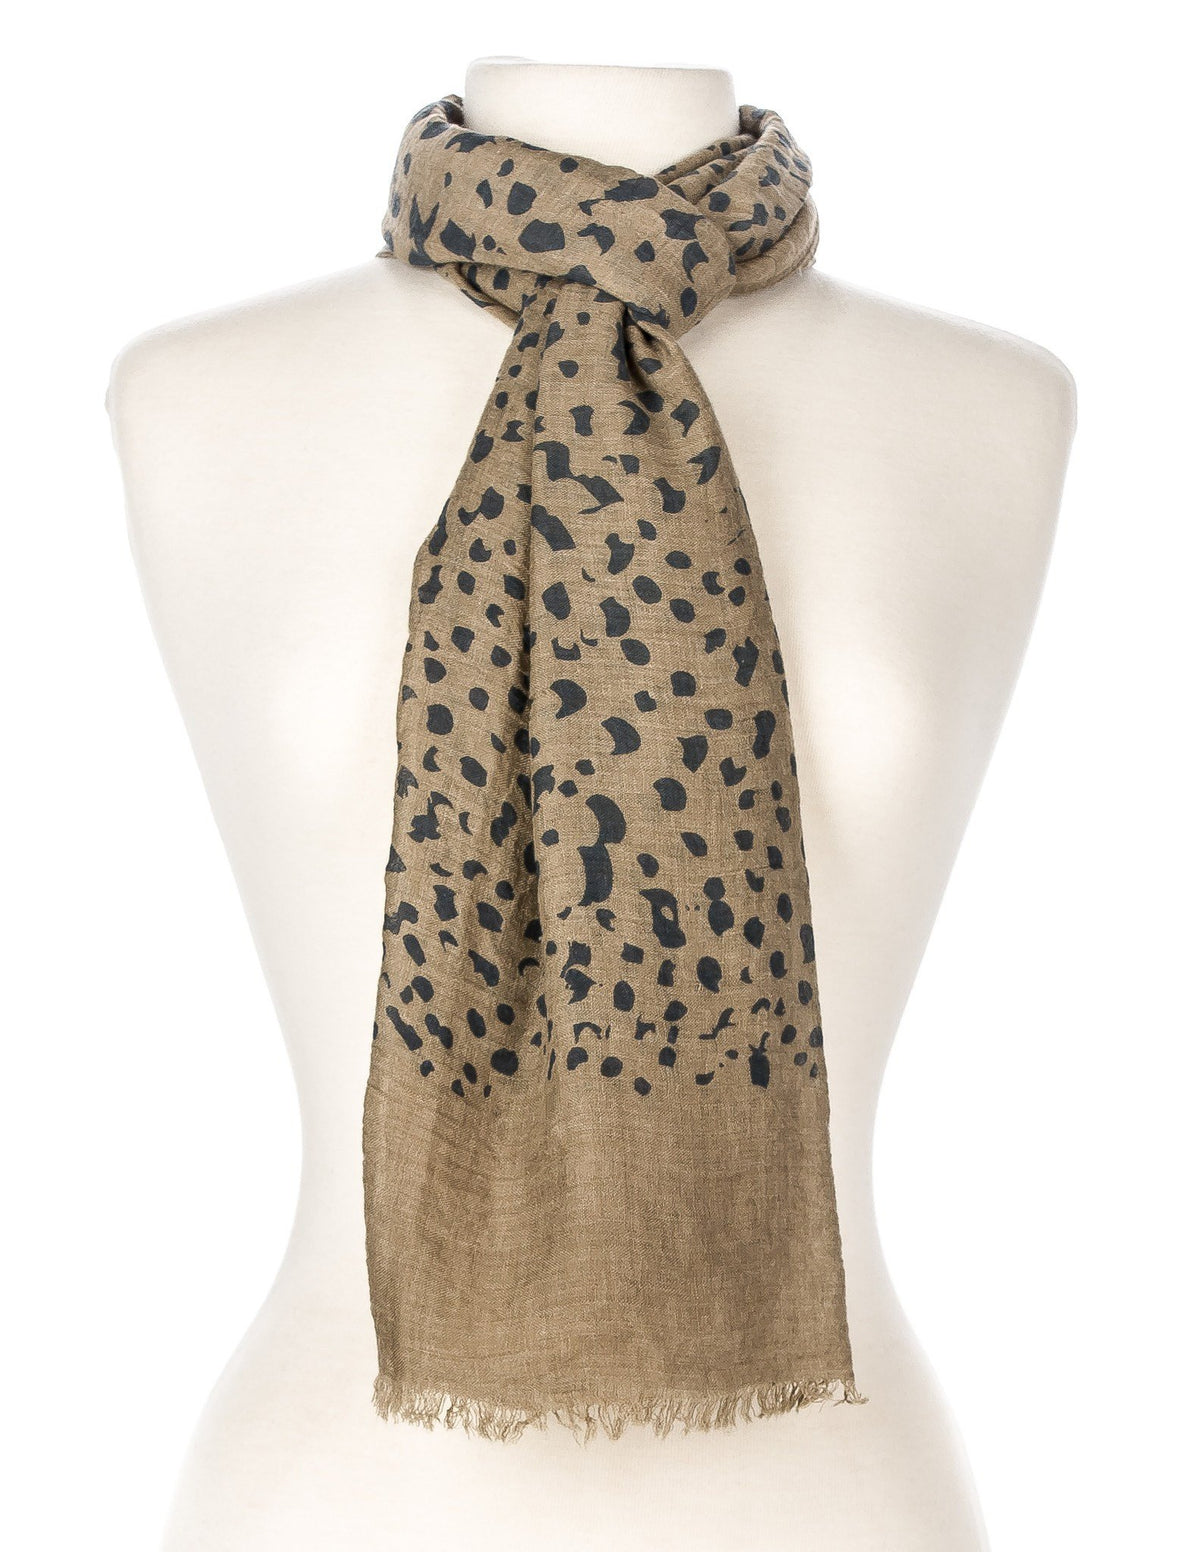 Leopard Print Spring Scarf - Taupe